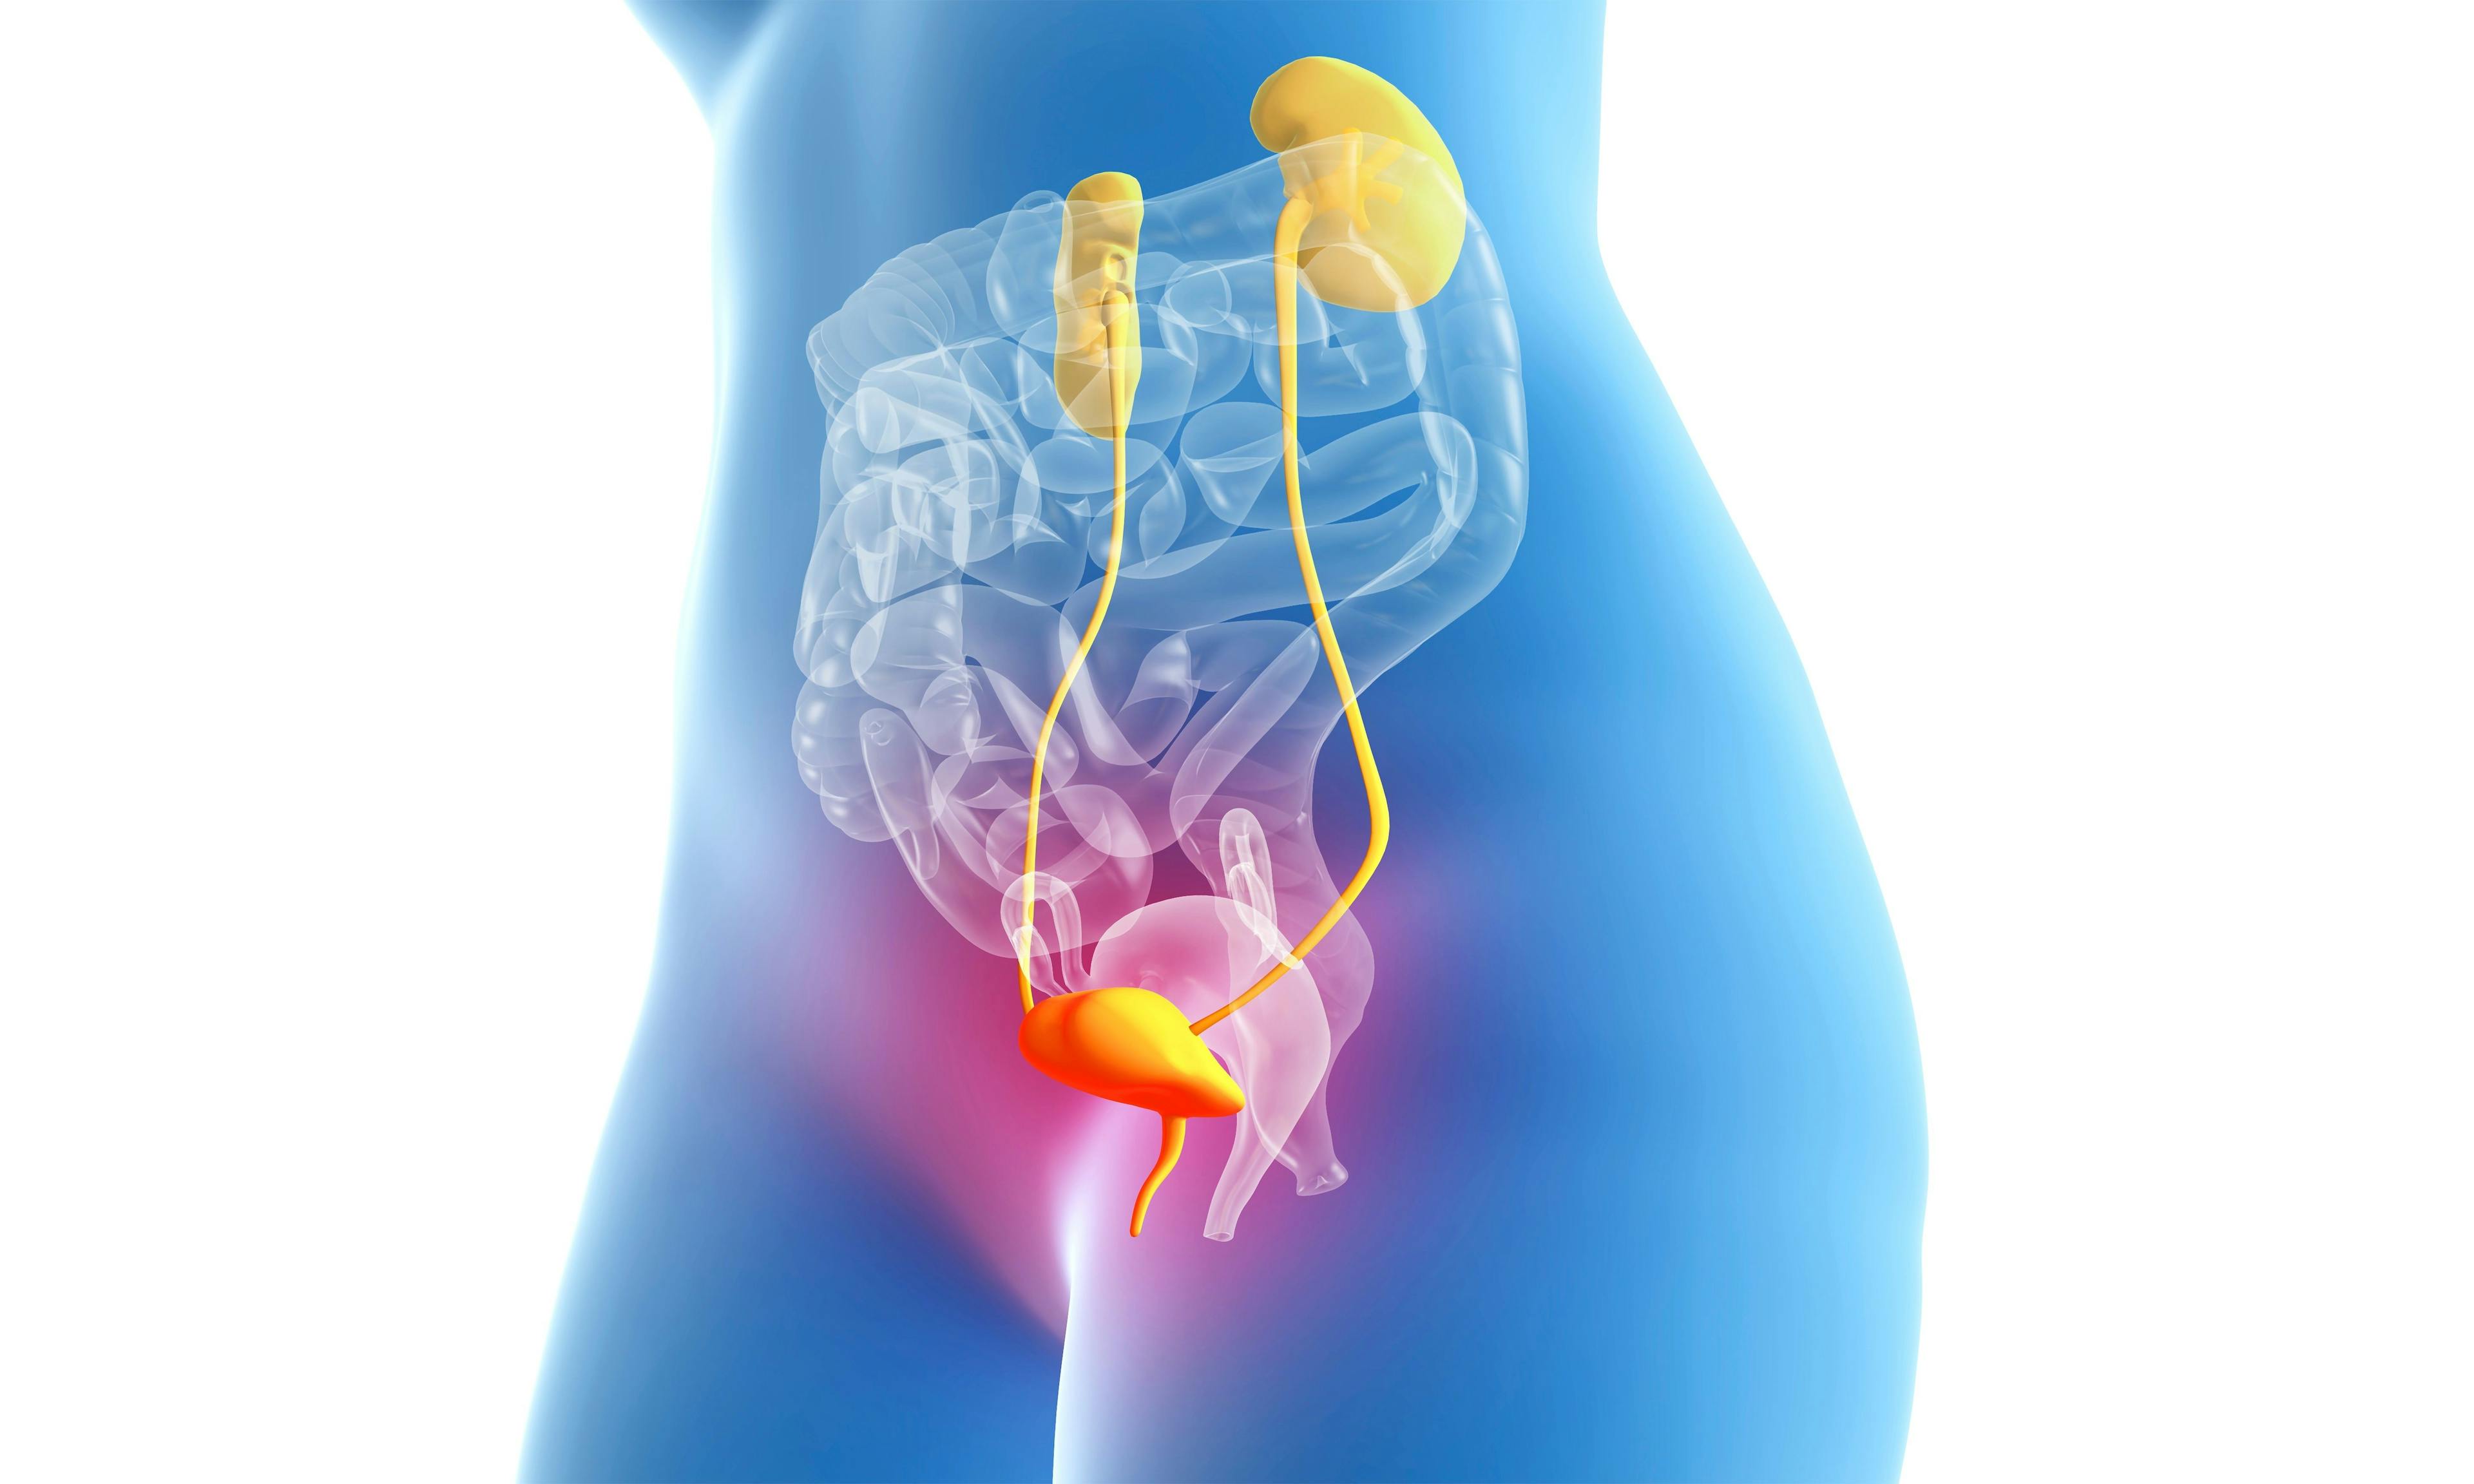 Image credit: TuMeggy | stock.adobe.com. Cystitis, urinary tract infection and inflammation of the bladder, female anatomy 3d illustration on white background